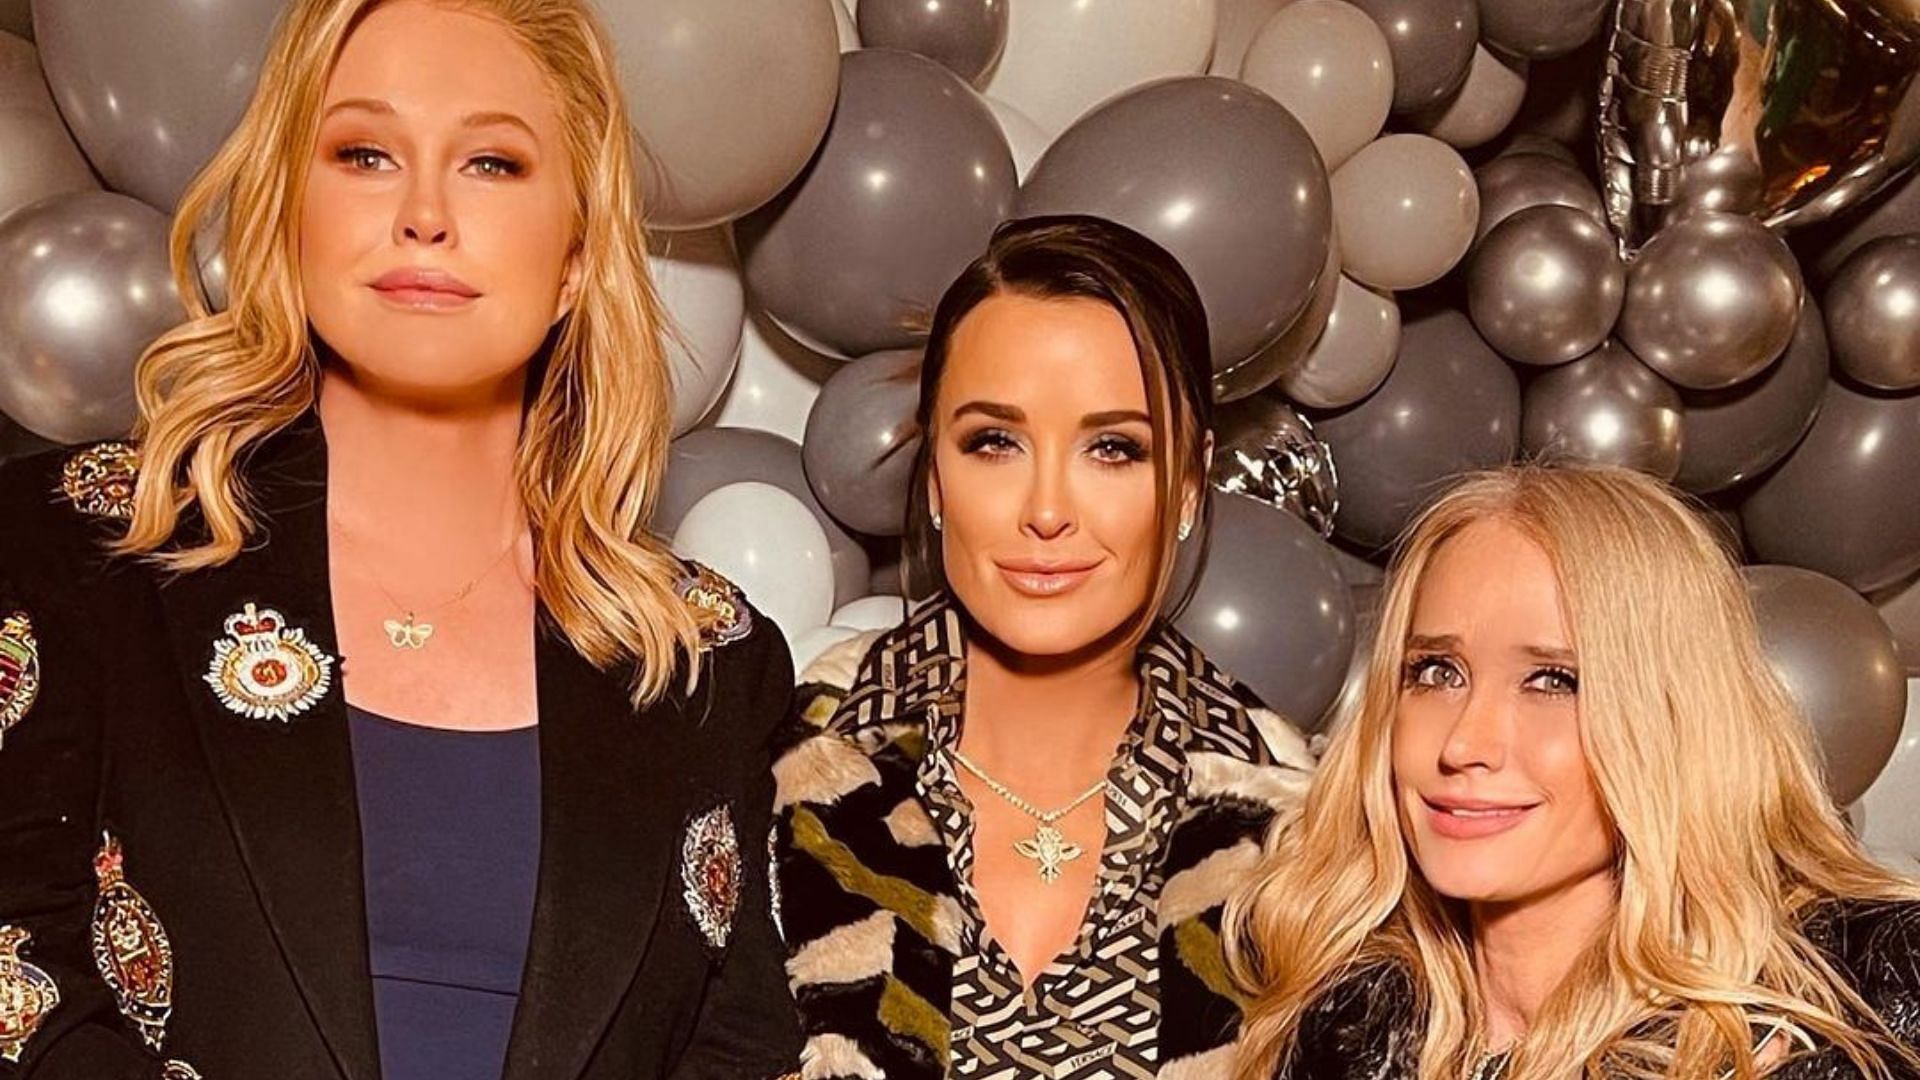 Kyle finds it difficult to shoot with her sister Kathy and Kim amid tension (Image via kylerichards18/Instagram)